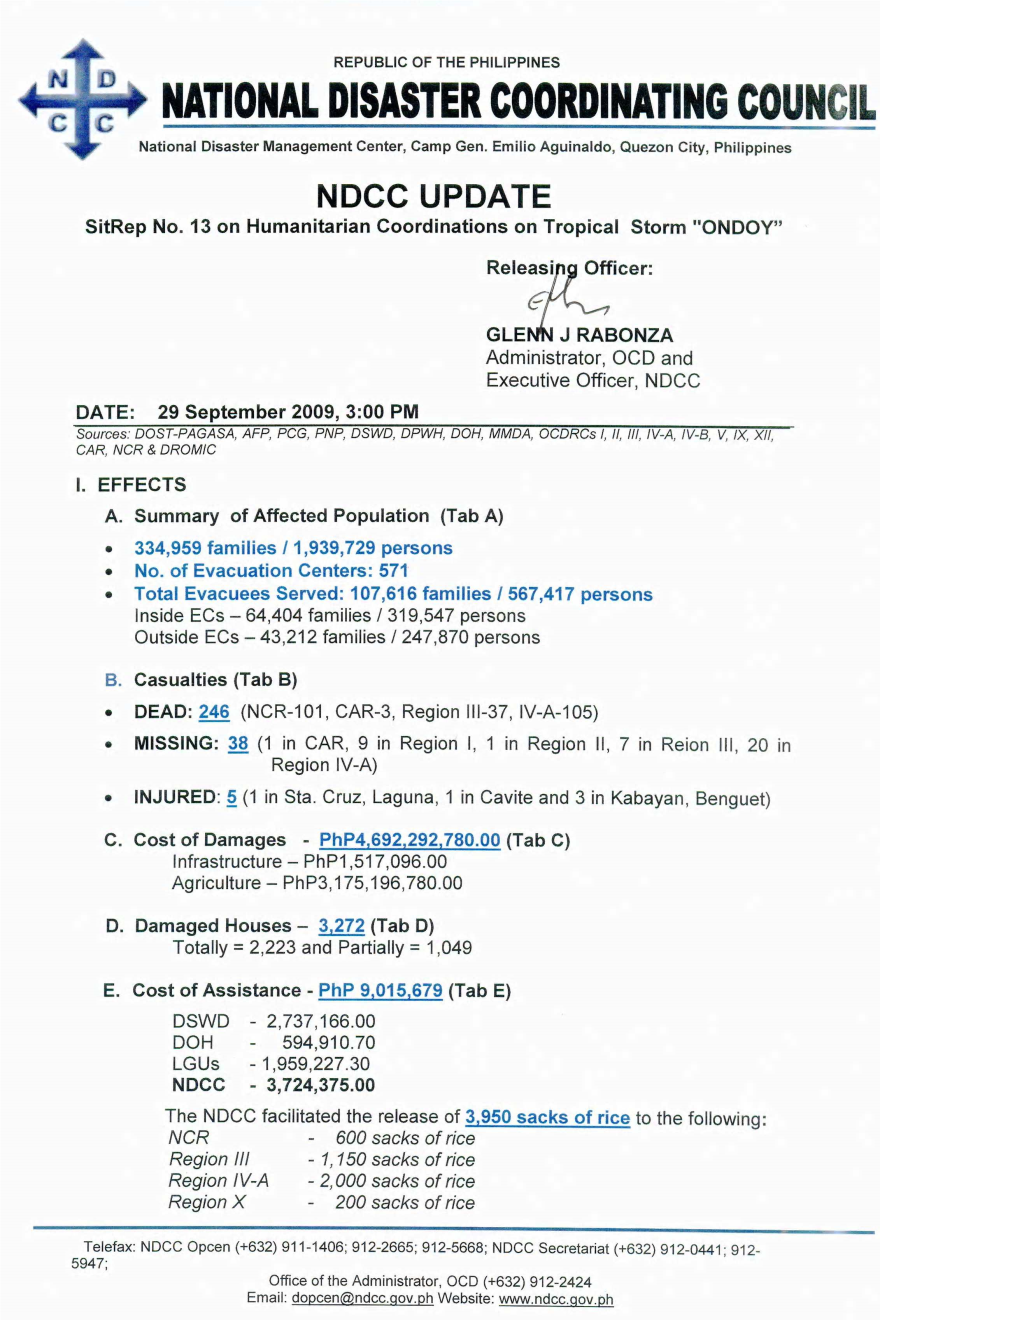 NDCC UPDATE No.13 As of 29 Sept 2009